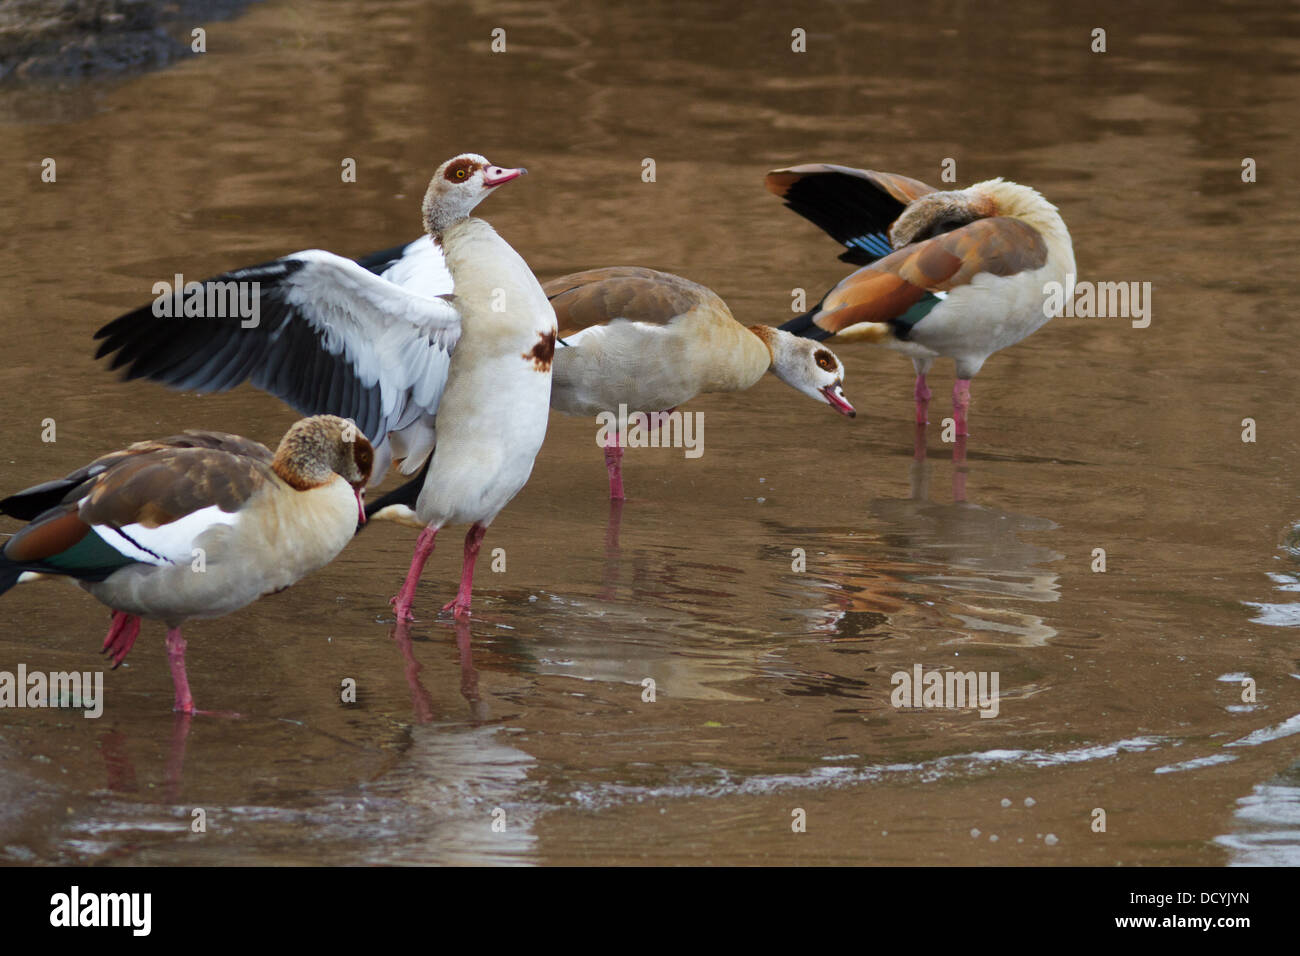 Group of Egyptian geese at river's edge, preening and demonstrating plumage, with reflections, Masai Mara, Kenya, East Africa Stock Photo